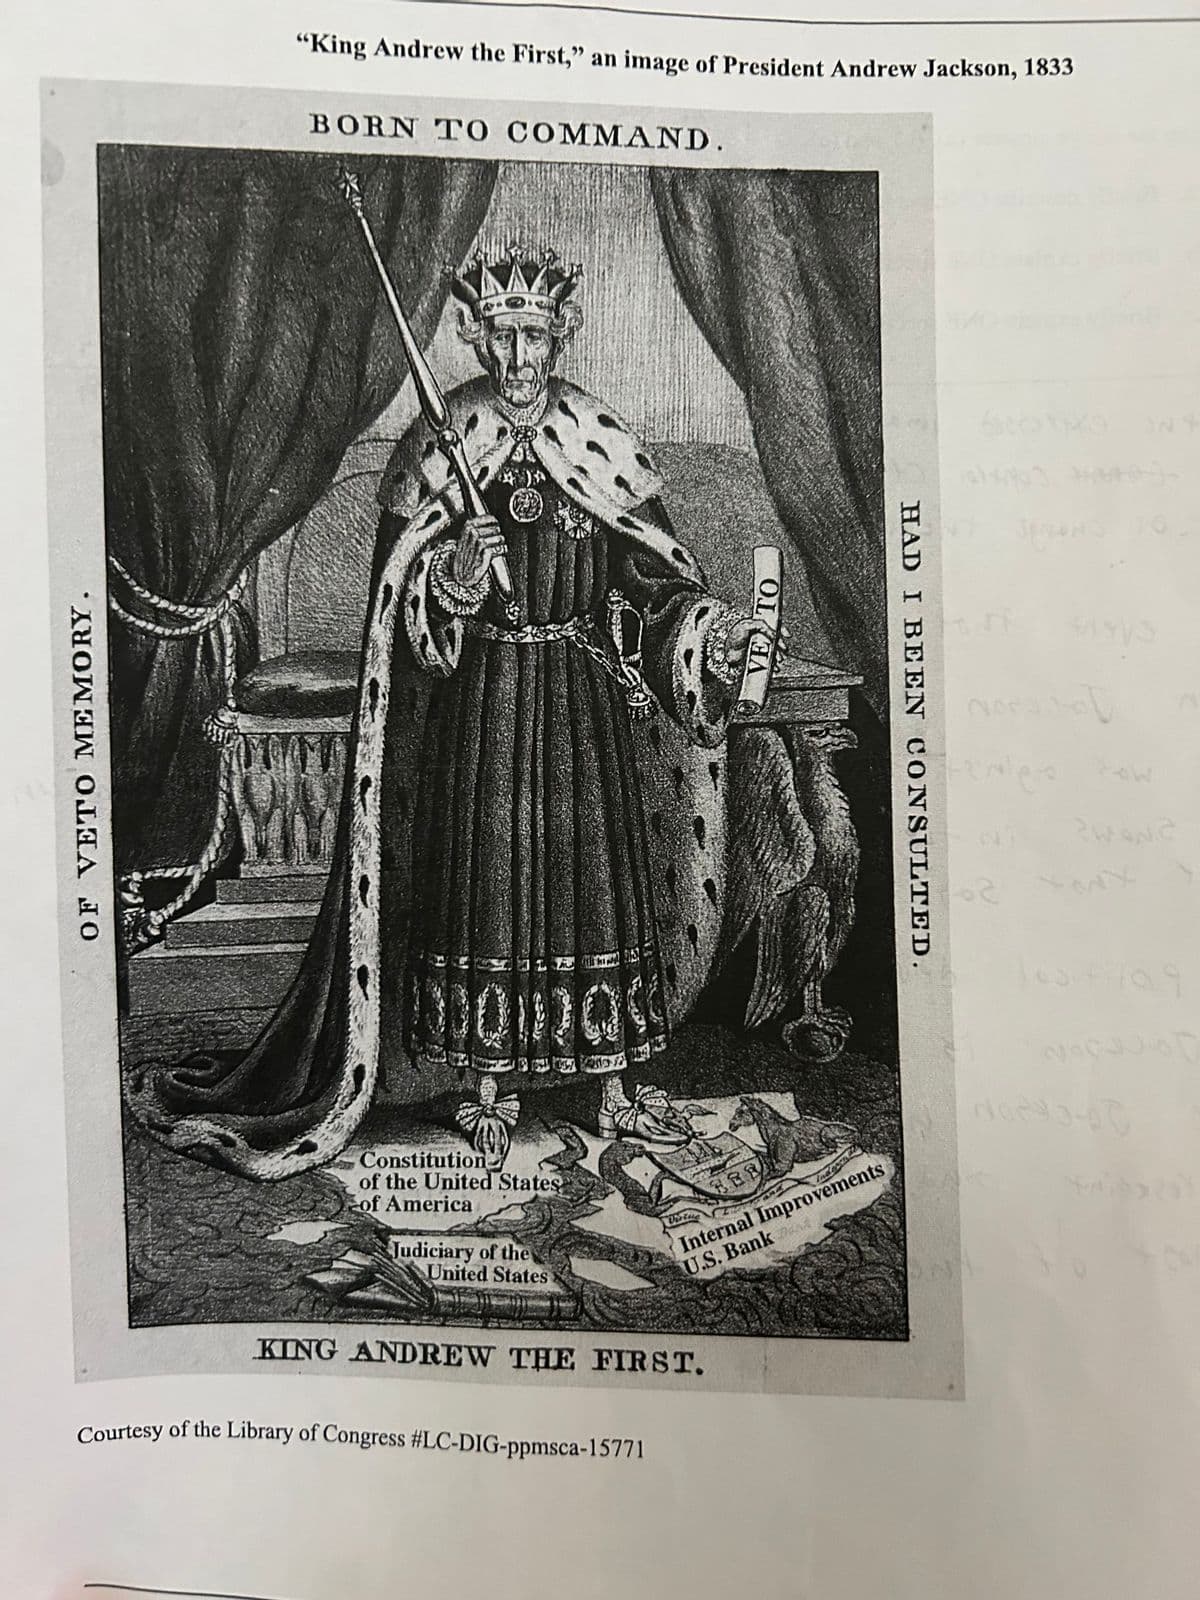 ●>
OF VETO MEMORY.
"King Andrew the First," an image of President Andrew Jackson, 1833
BORN TO COMMAND.
Judiciary of the
Za 30
Constitution
of the United States
of America
United States
20
Virtus
Courtesy of the Library of Congress #LC-DIG-ppmsca-15771
KING ANDREW THE FIRST.
VE TO
388
Internal Improvements
U.S. Bank Pank
HAD I BEEN CONSULTED.
nf
41
Noras-o
me
10
IN
WANC
06233-00
19
SO
2)